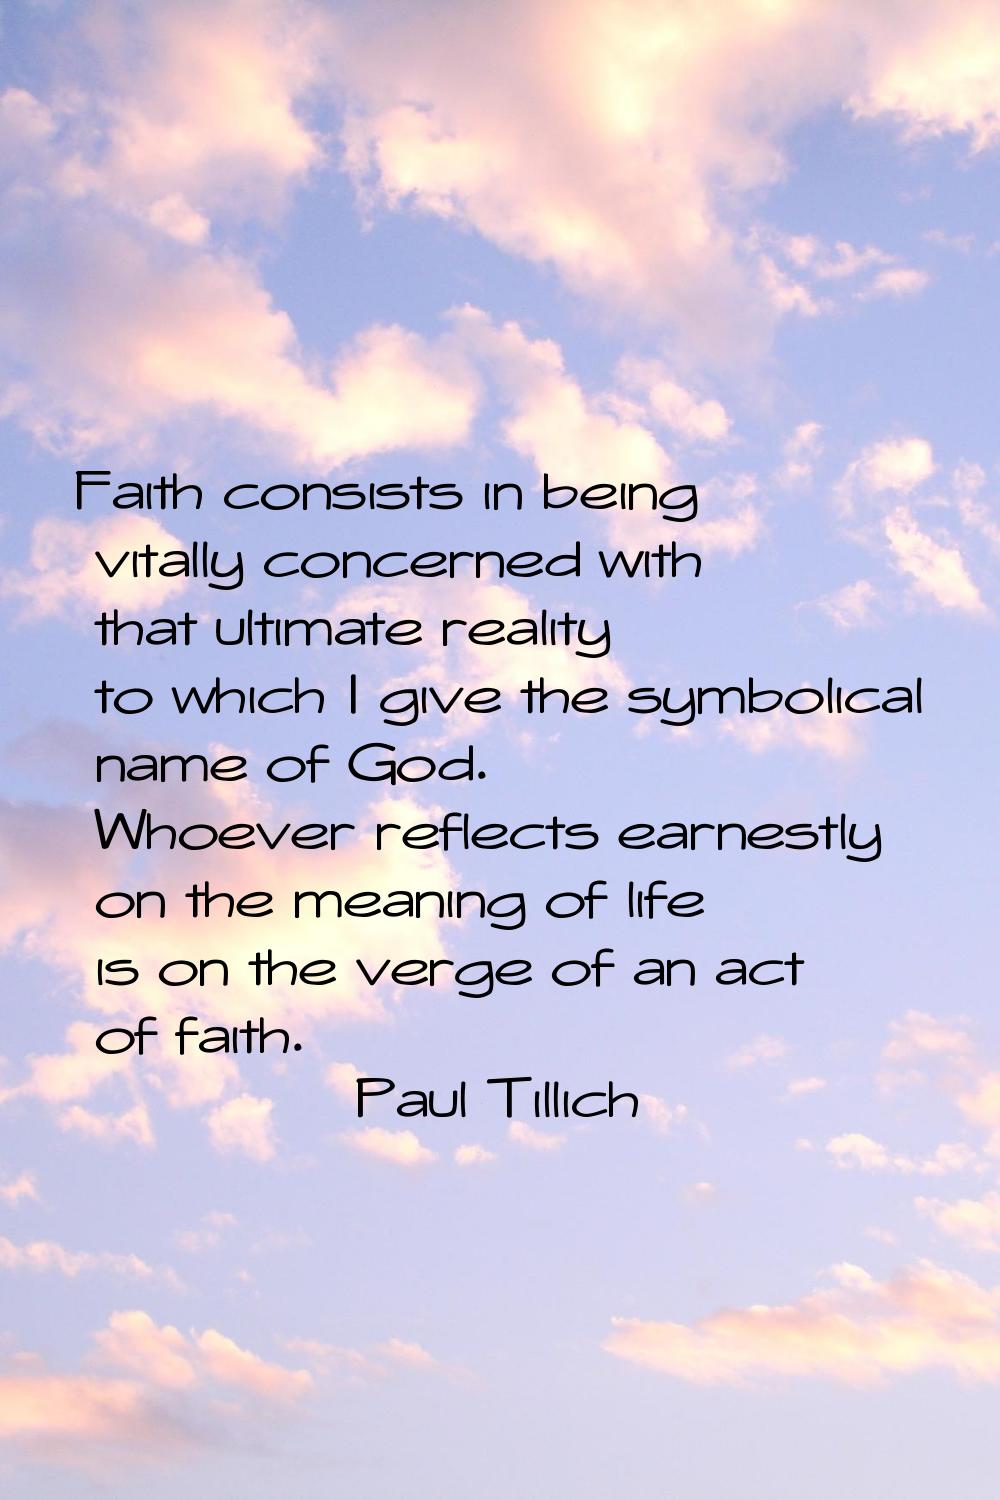 Faith consists in being vitally concerned with that ultimate reality to which I give the symbolical